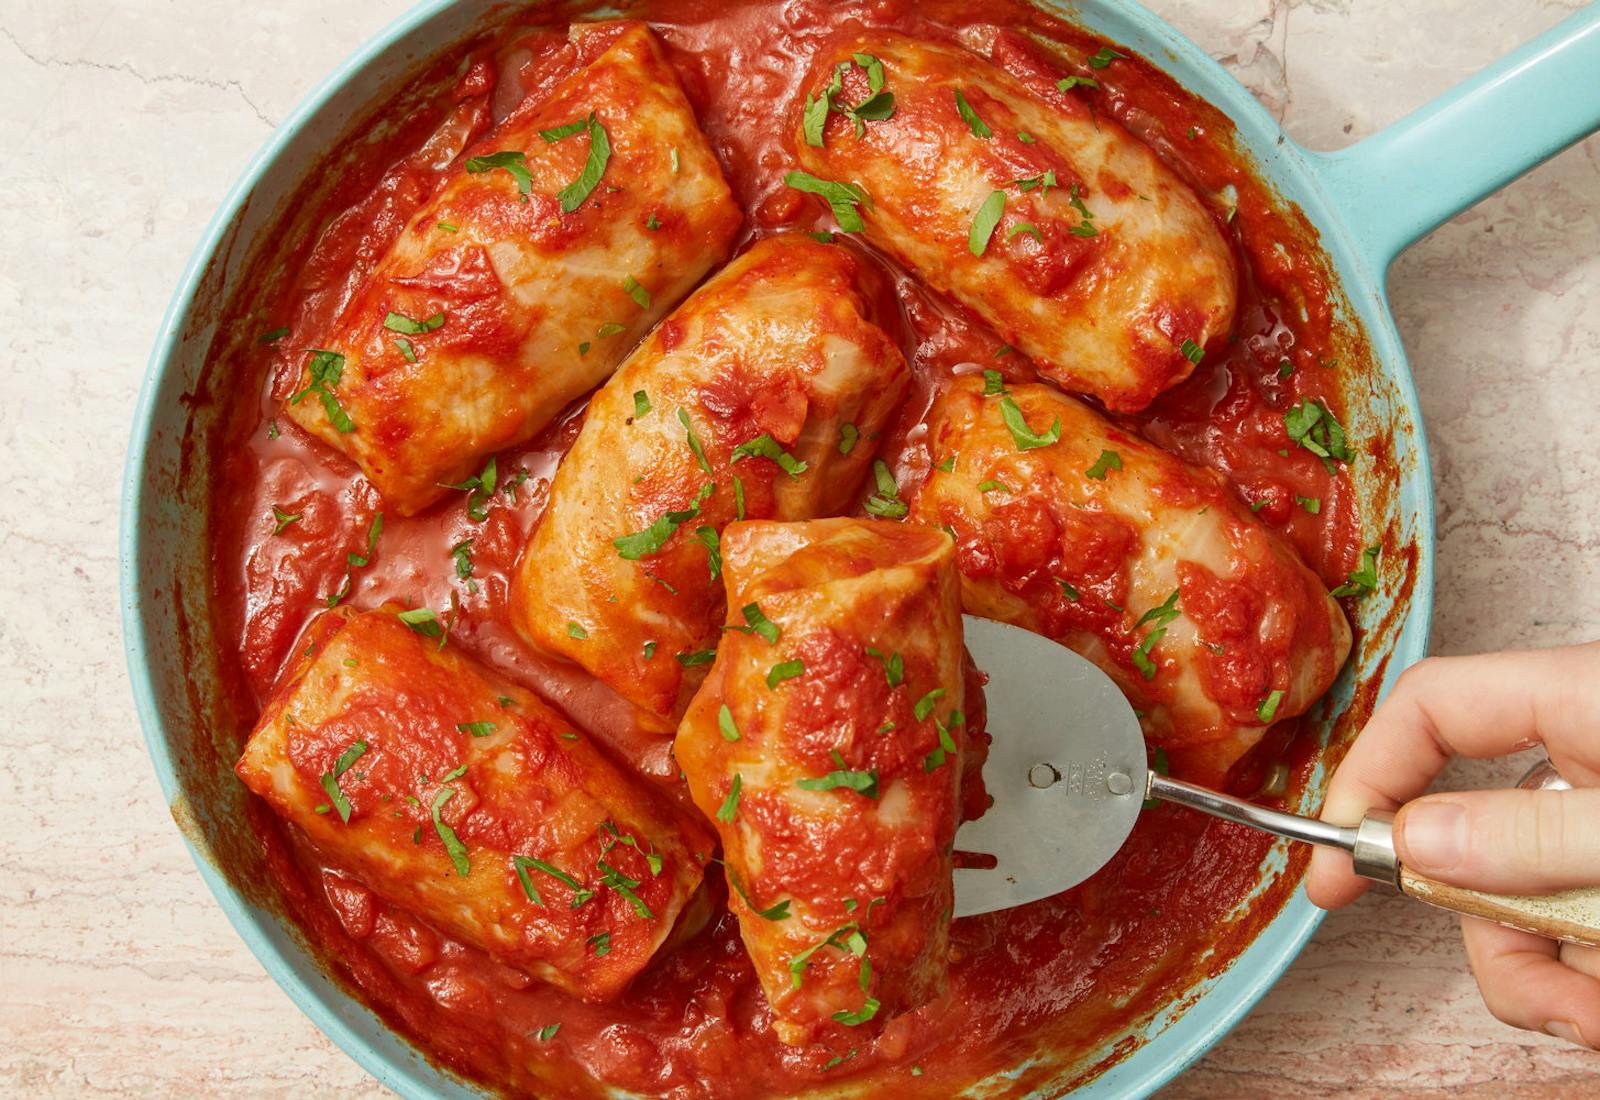 Blue skillet with stuffed cabbage in tomato sauce garnished with parsley.